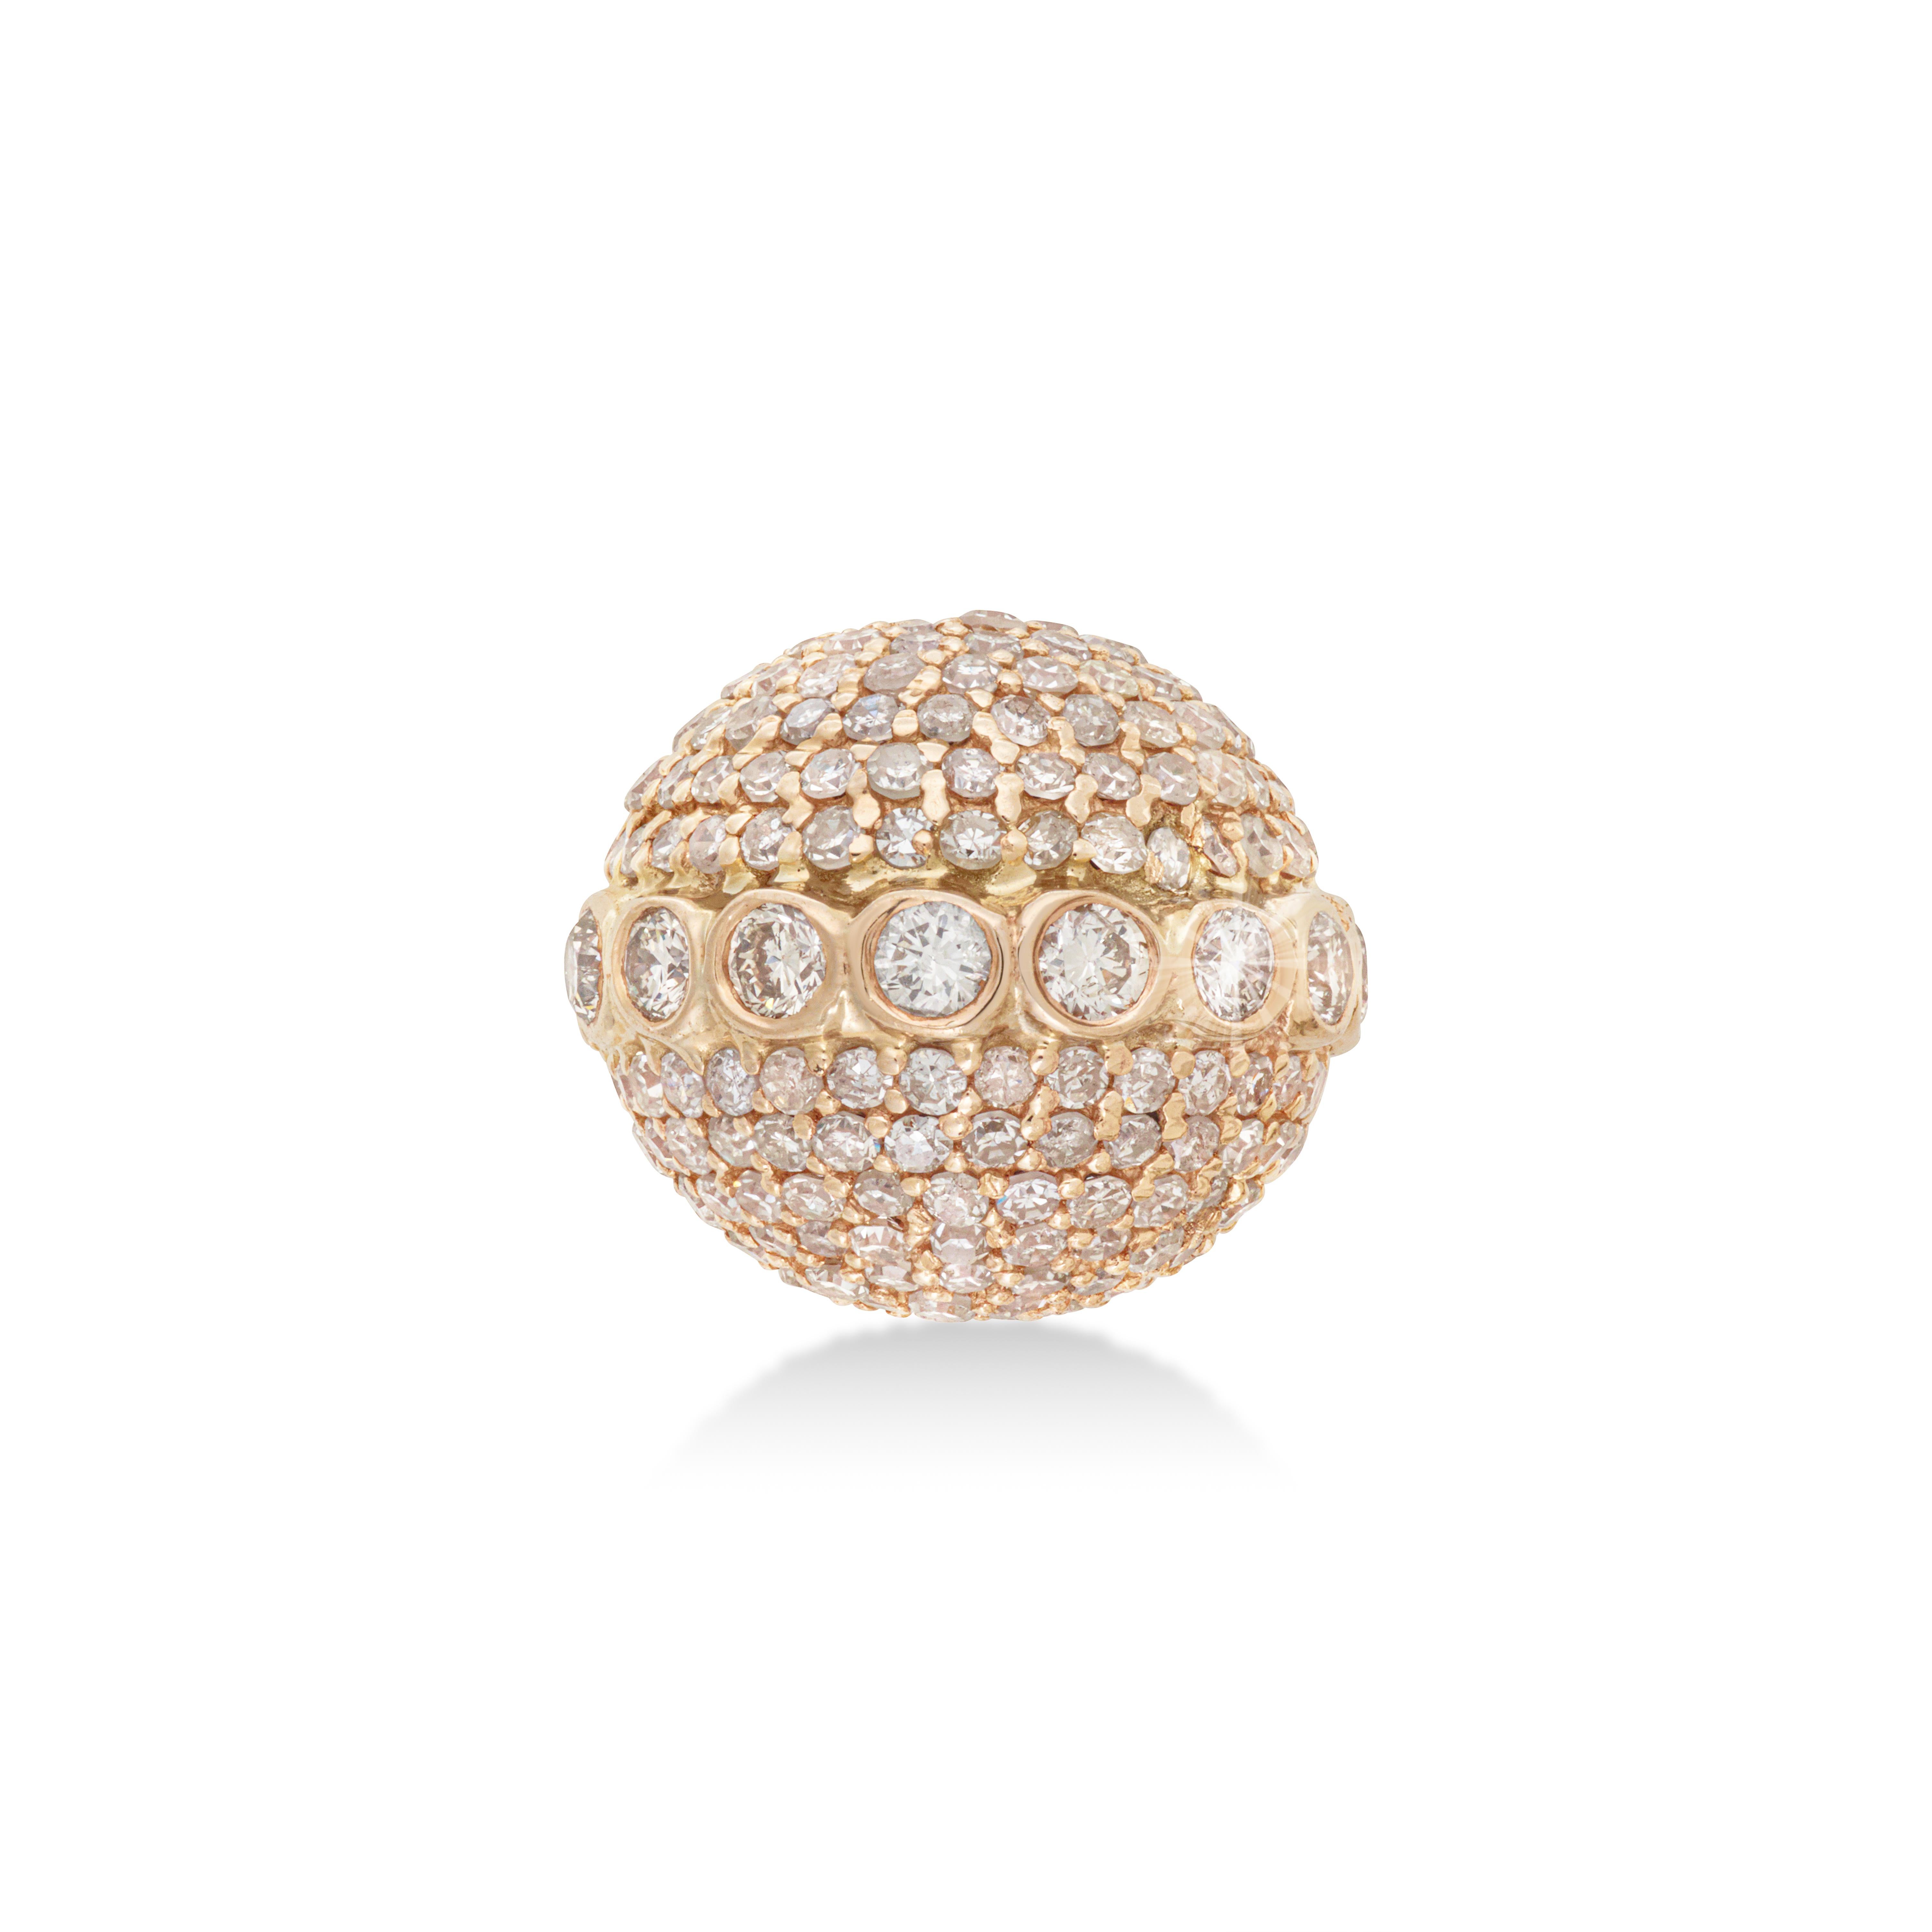 Contemporary Golden South Sea Pearl Bracelet with 18k Yellow Gold Diamond Encrusted Orbs For Sale